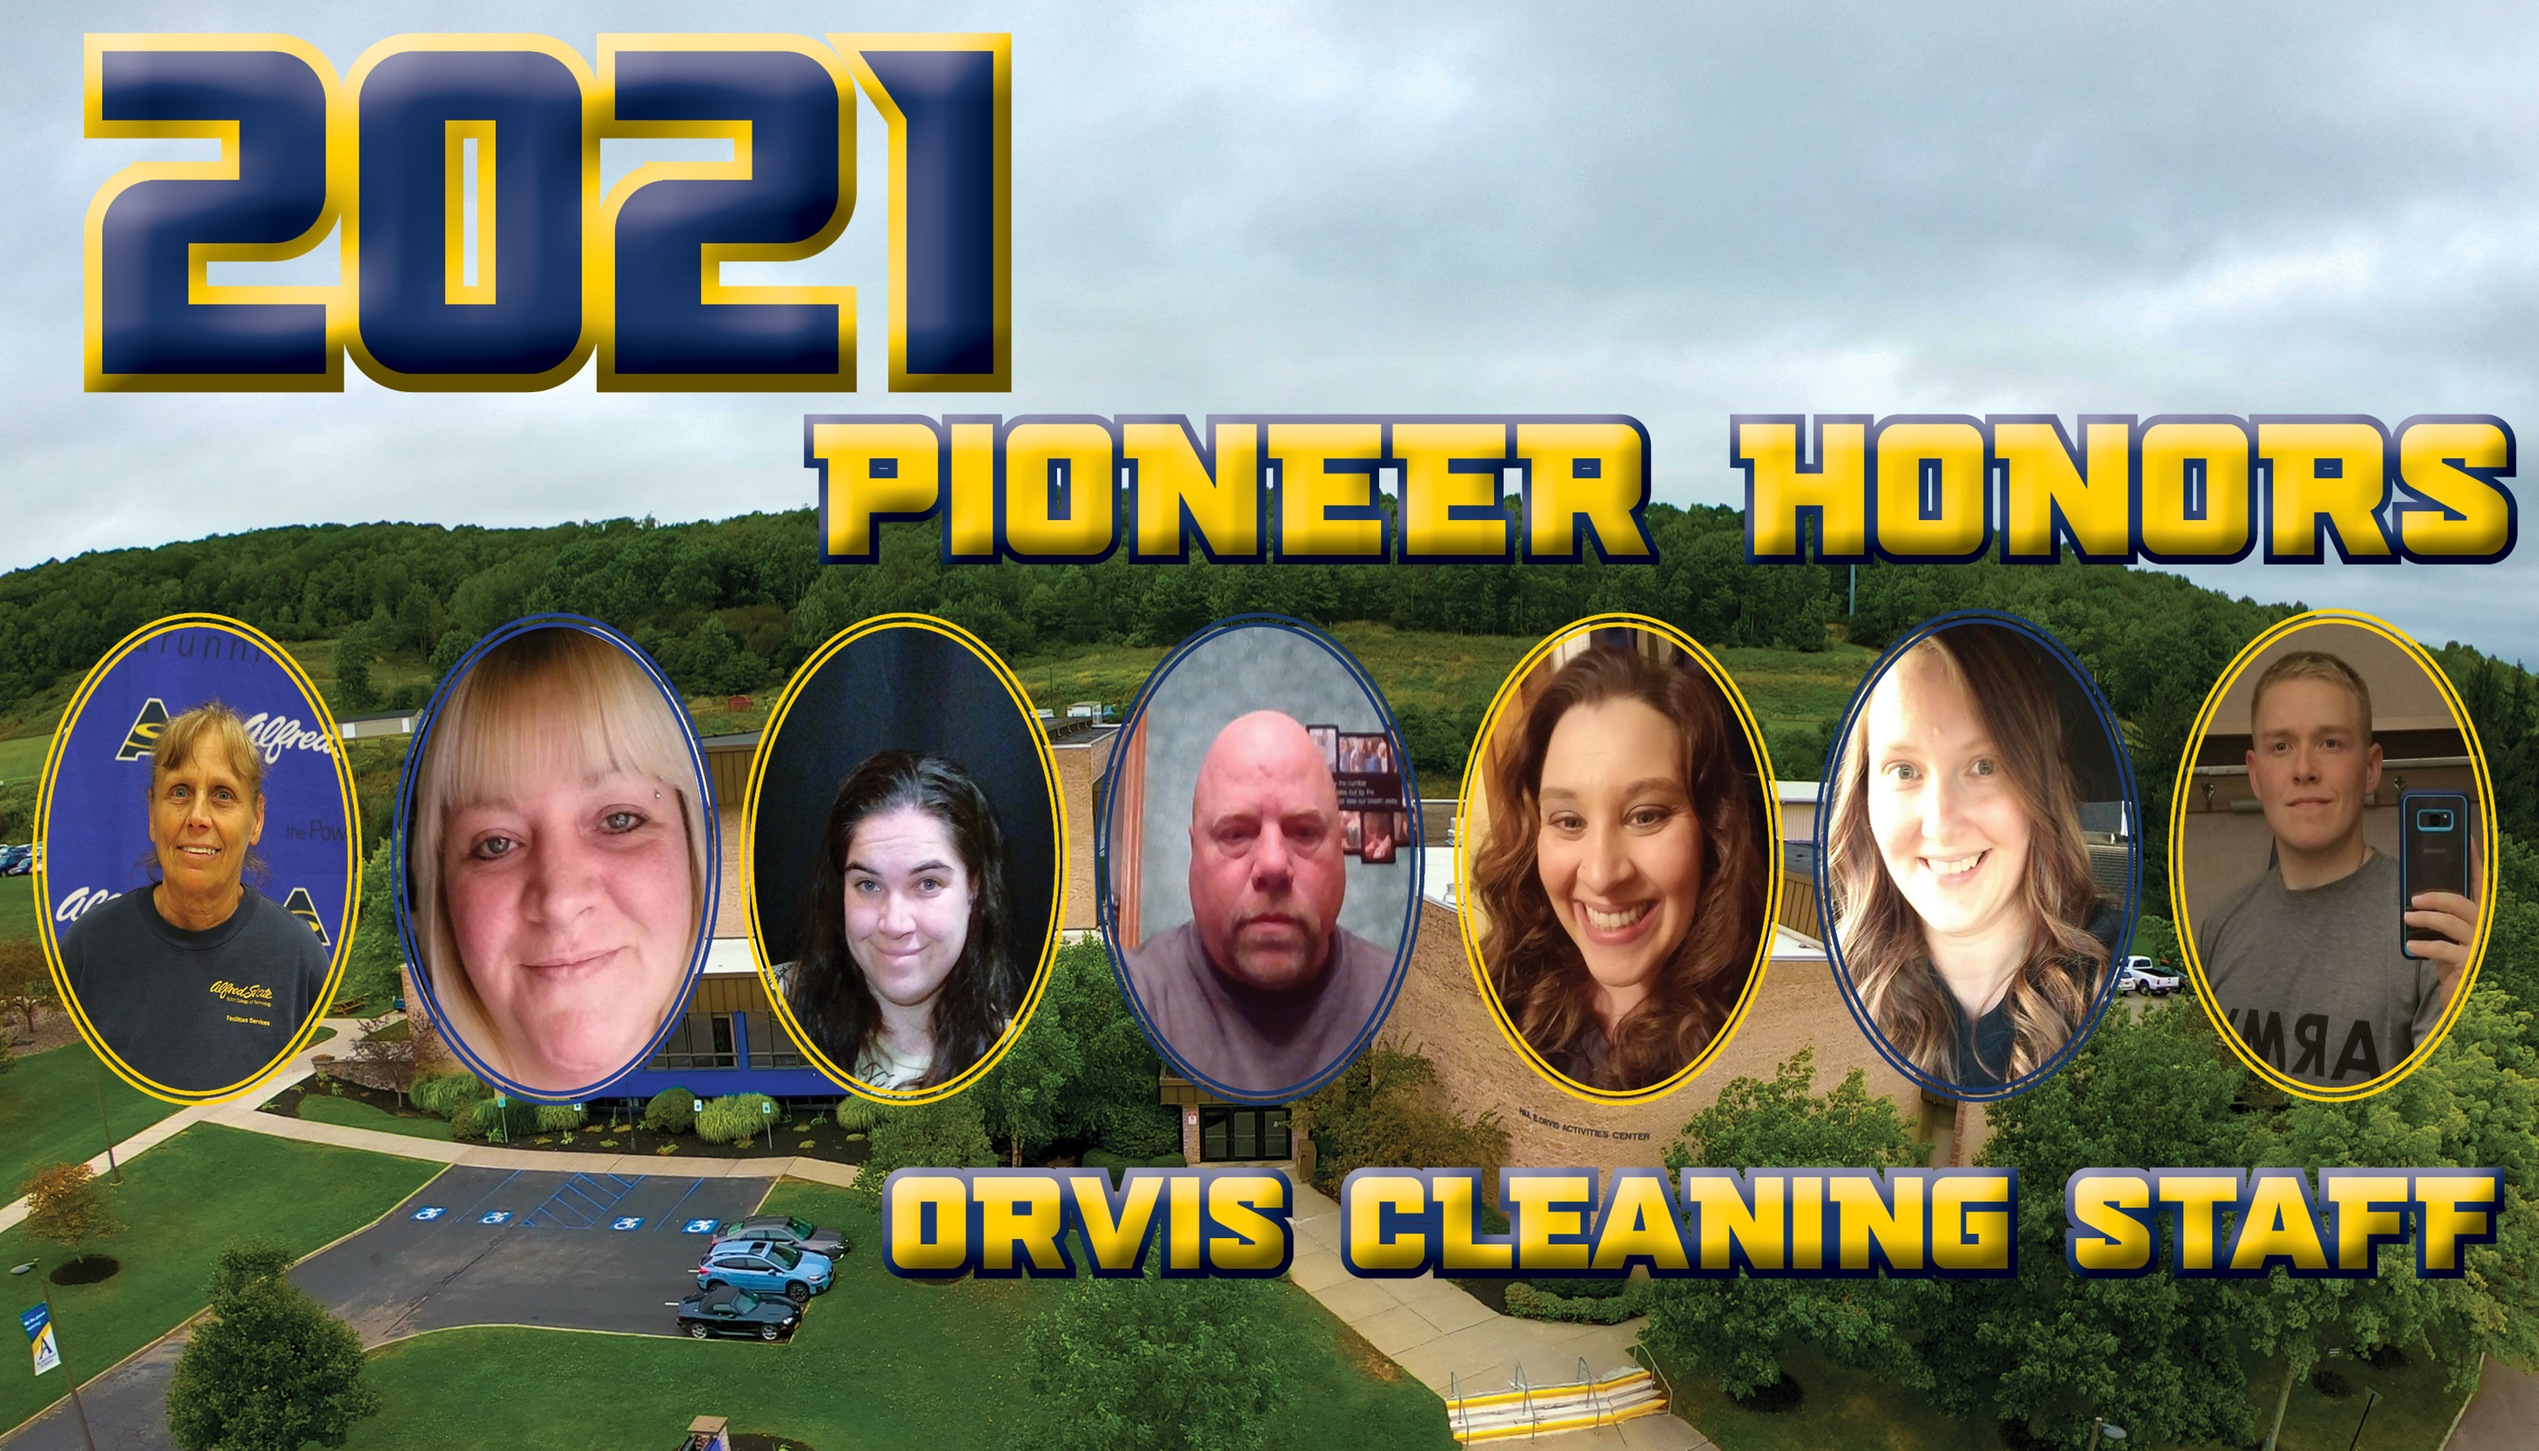 Pioneer Honors given to the Orvis Cleaning Staff